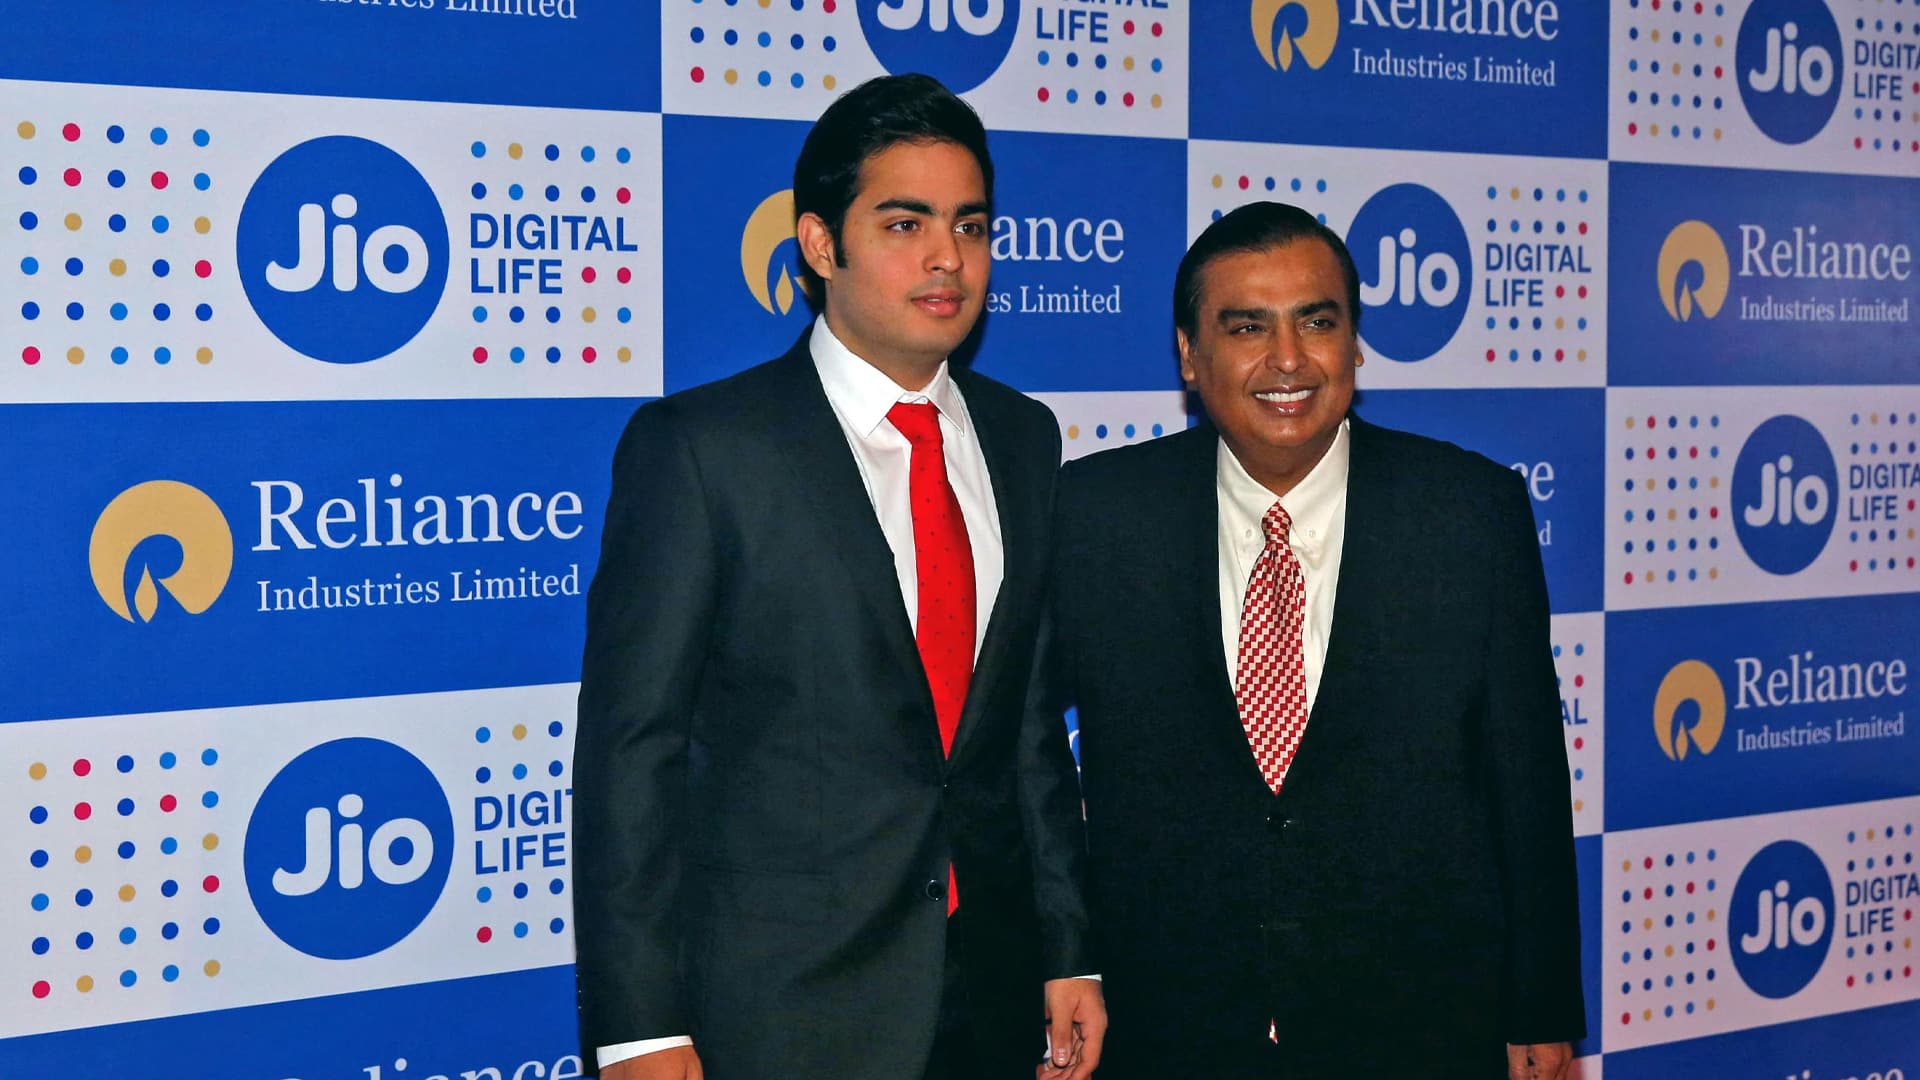 After $3 bln, Reliance and Jio raise $2 bln forex loan